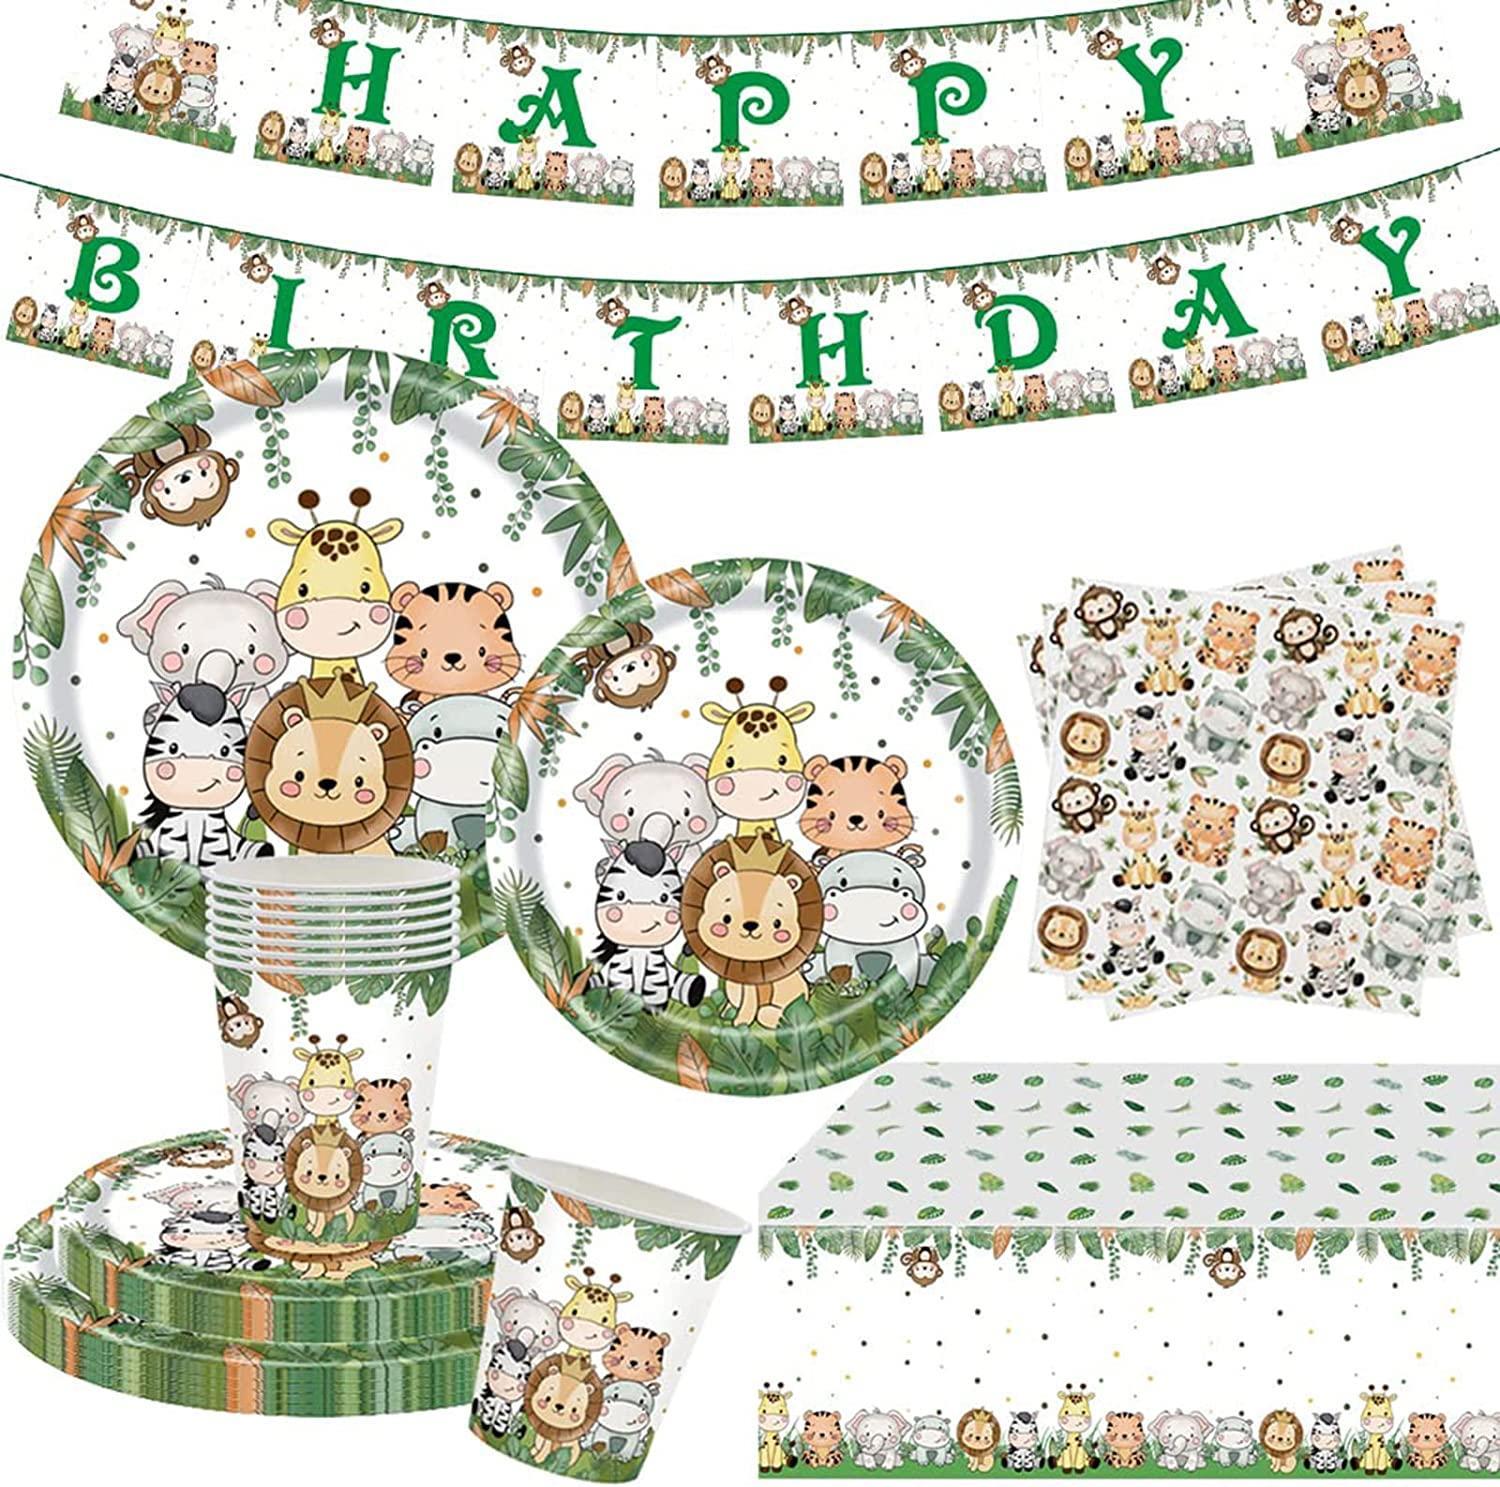 Kids Party Disposable Cutlery Wild Lion Giraffe Monkey Tableware with Plates and Napkin Serves 10 Birthday Theme Party Decorations